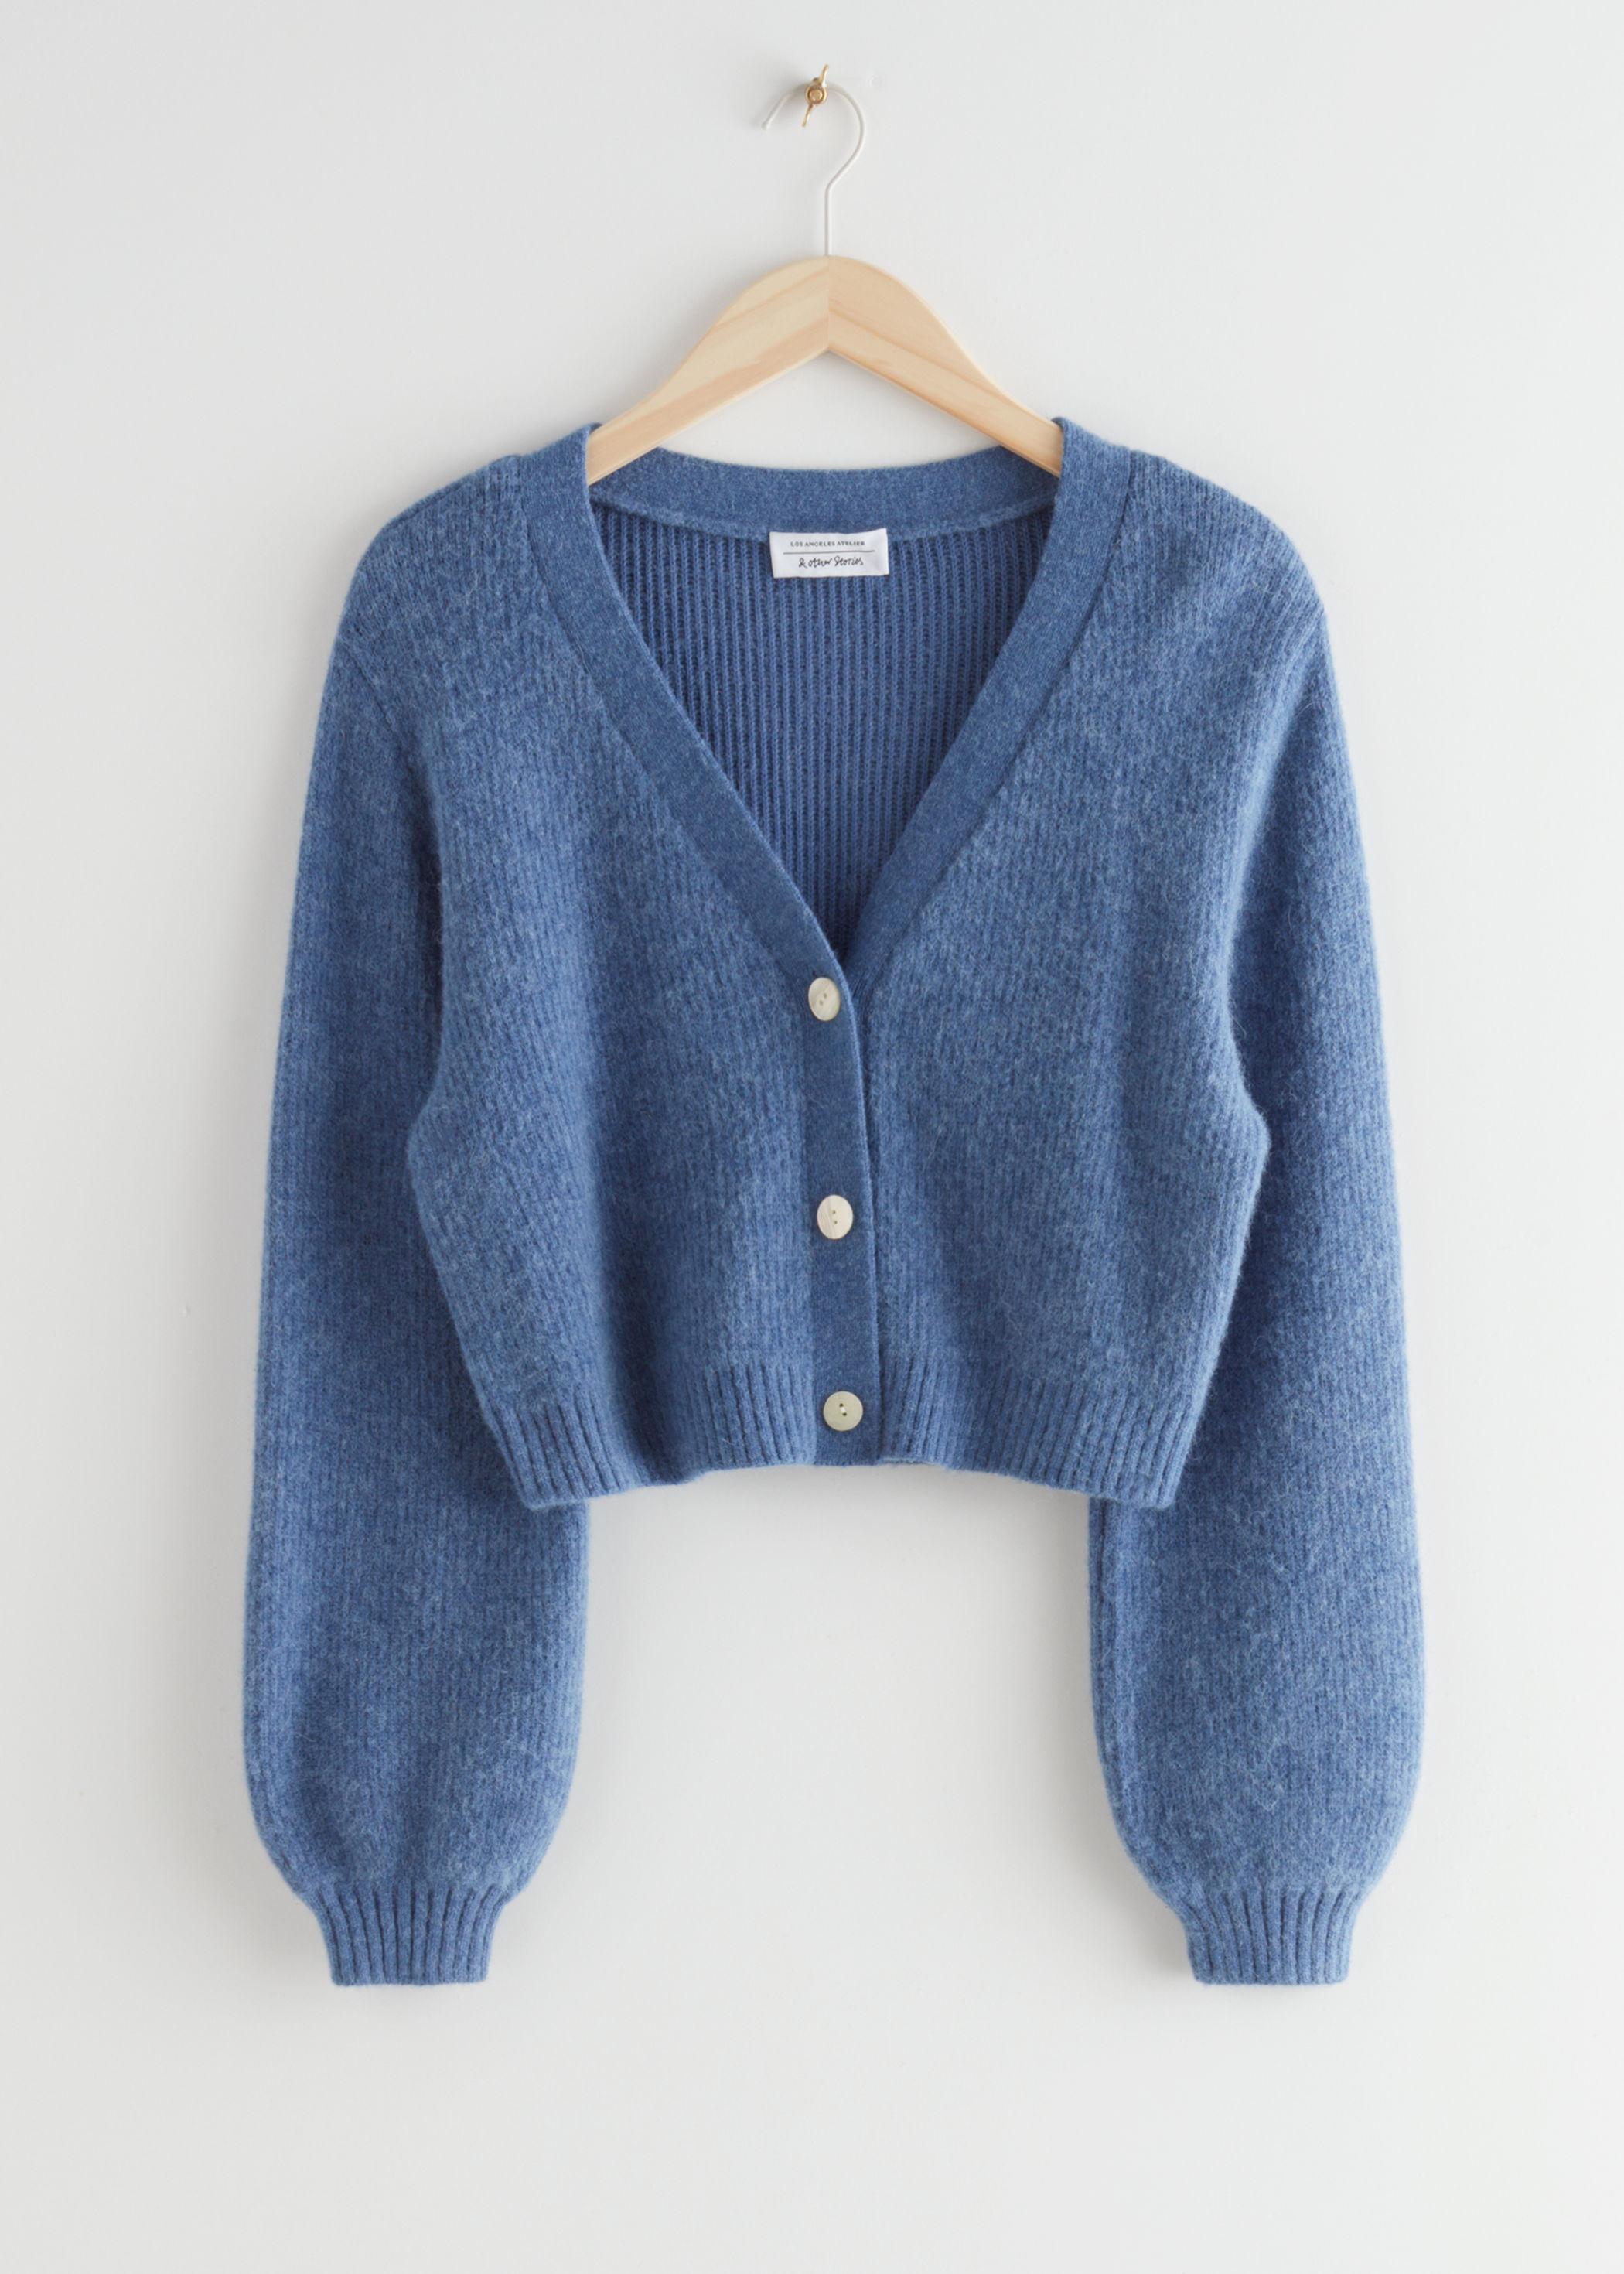 & Other Stories Cropped Boxy Knit Cardigan in Blue - Lyst